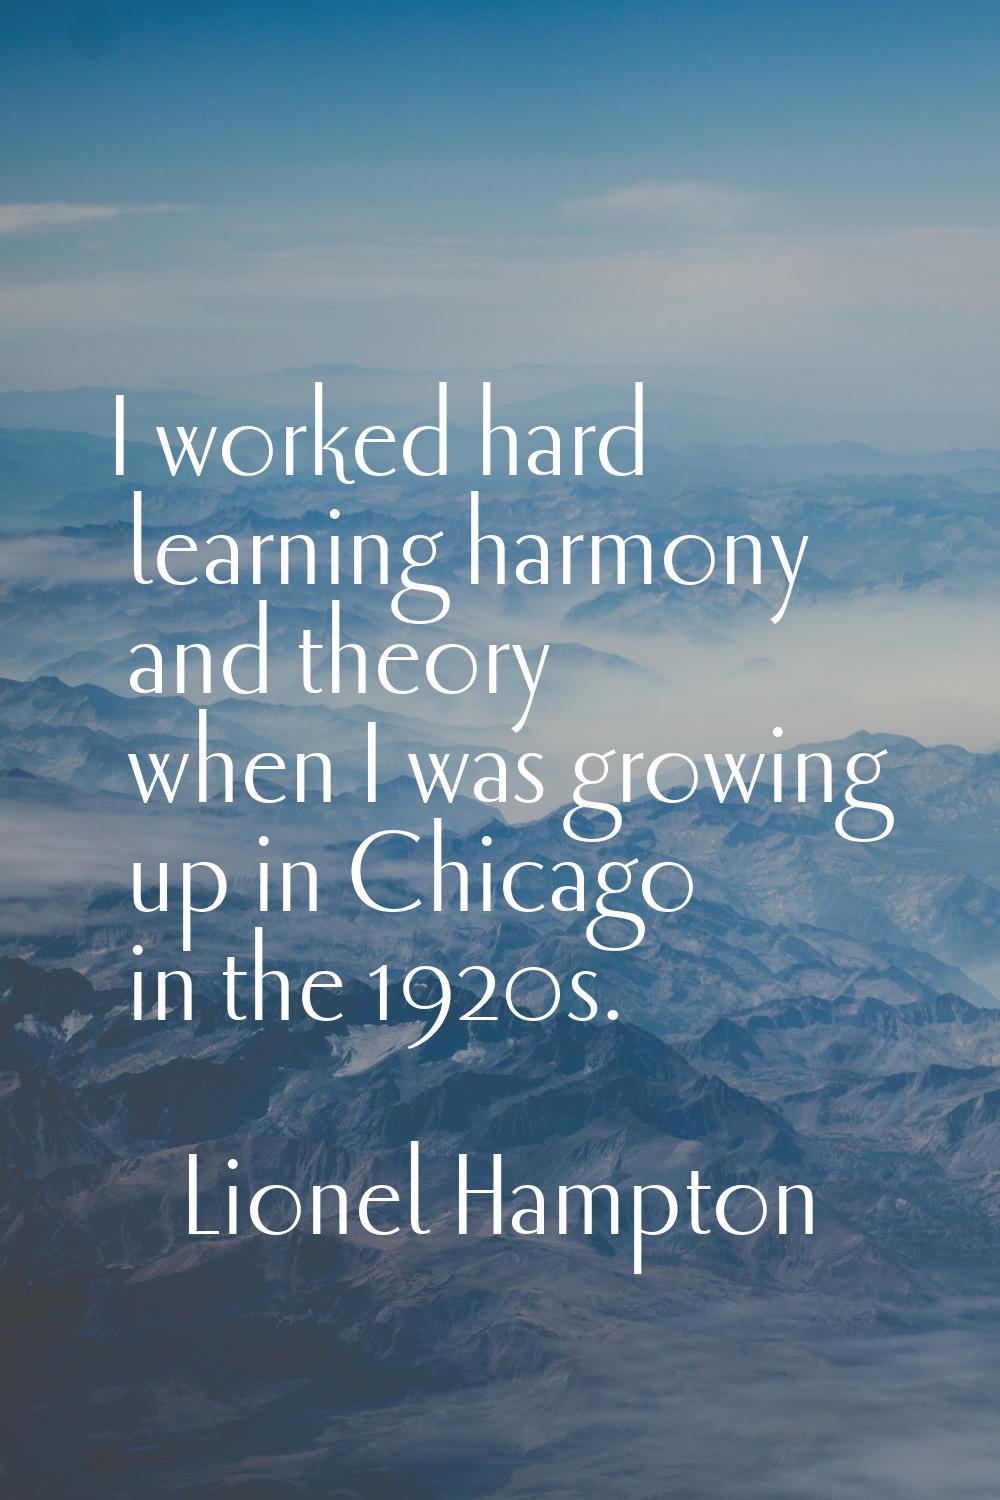 I worked hard learning harmony and theory when I was growing up in Chicago in the 1920s.